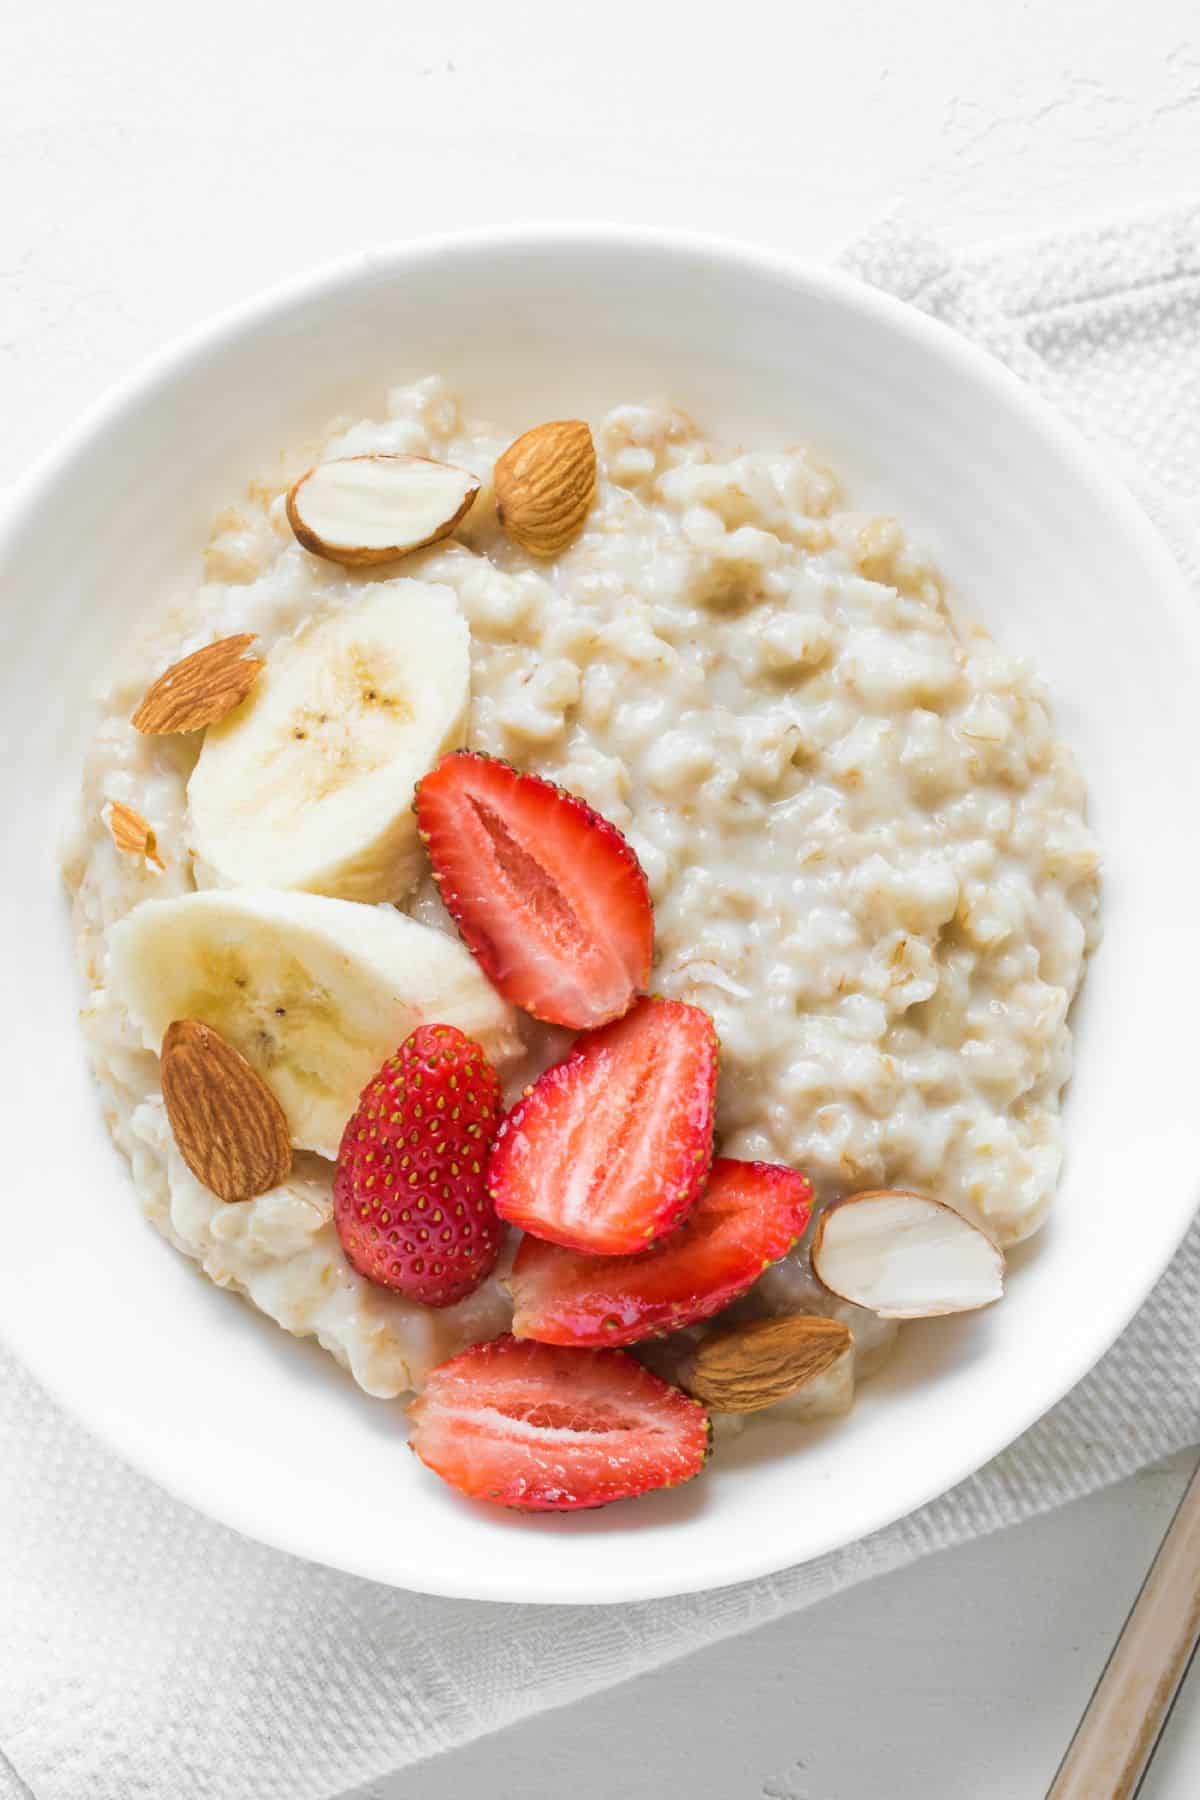 5 Ways Oatmeal Causes Bloating (Plus How to Reduce Symptoms)